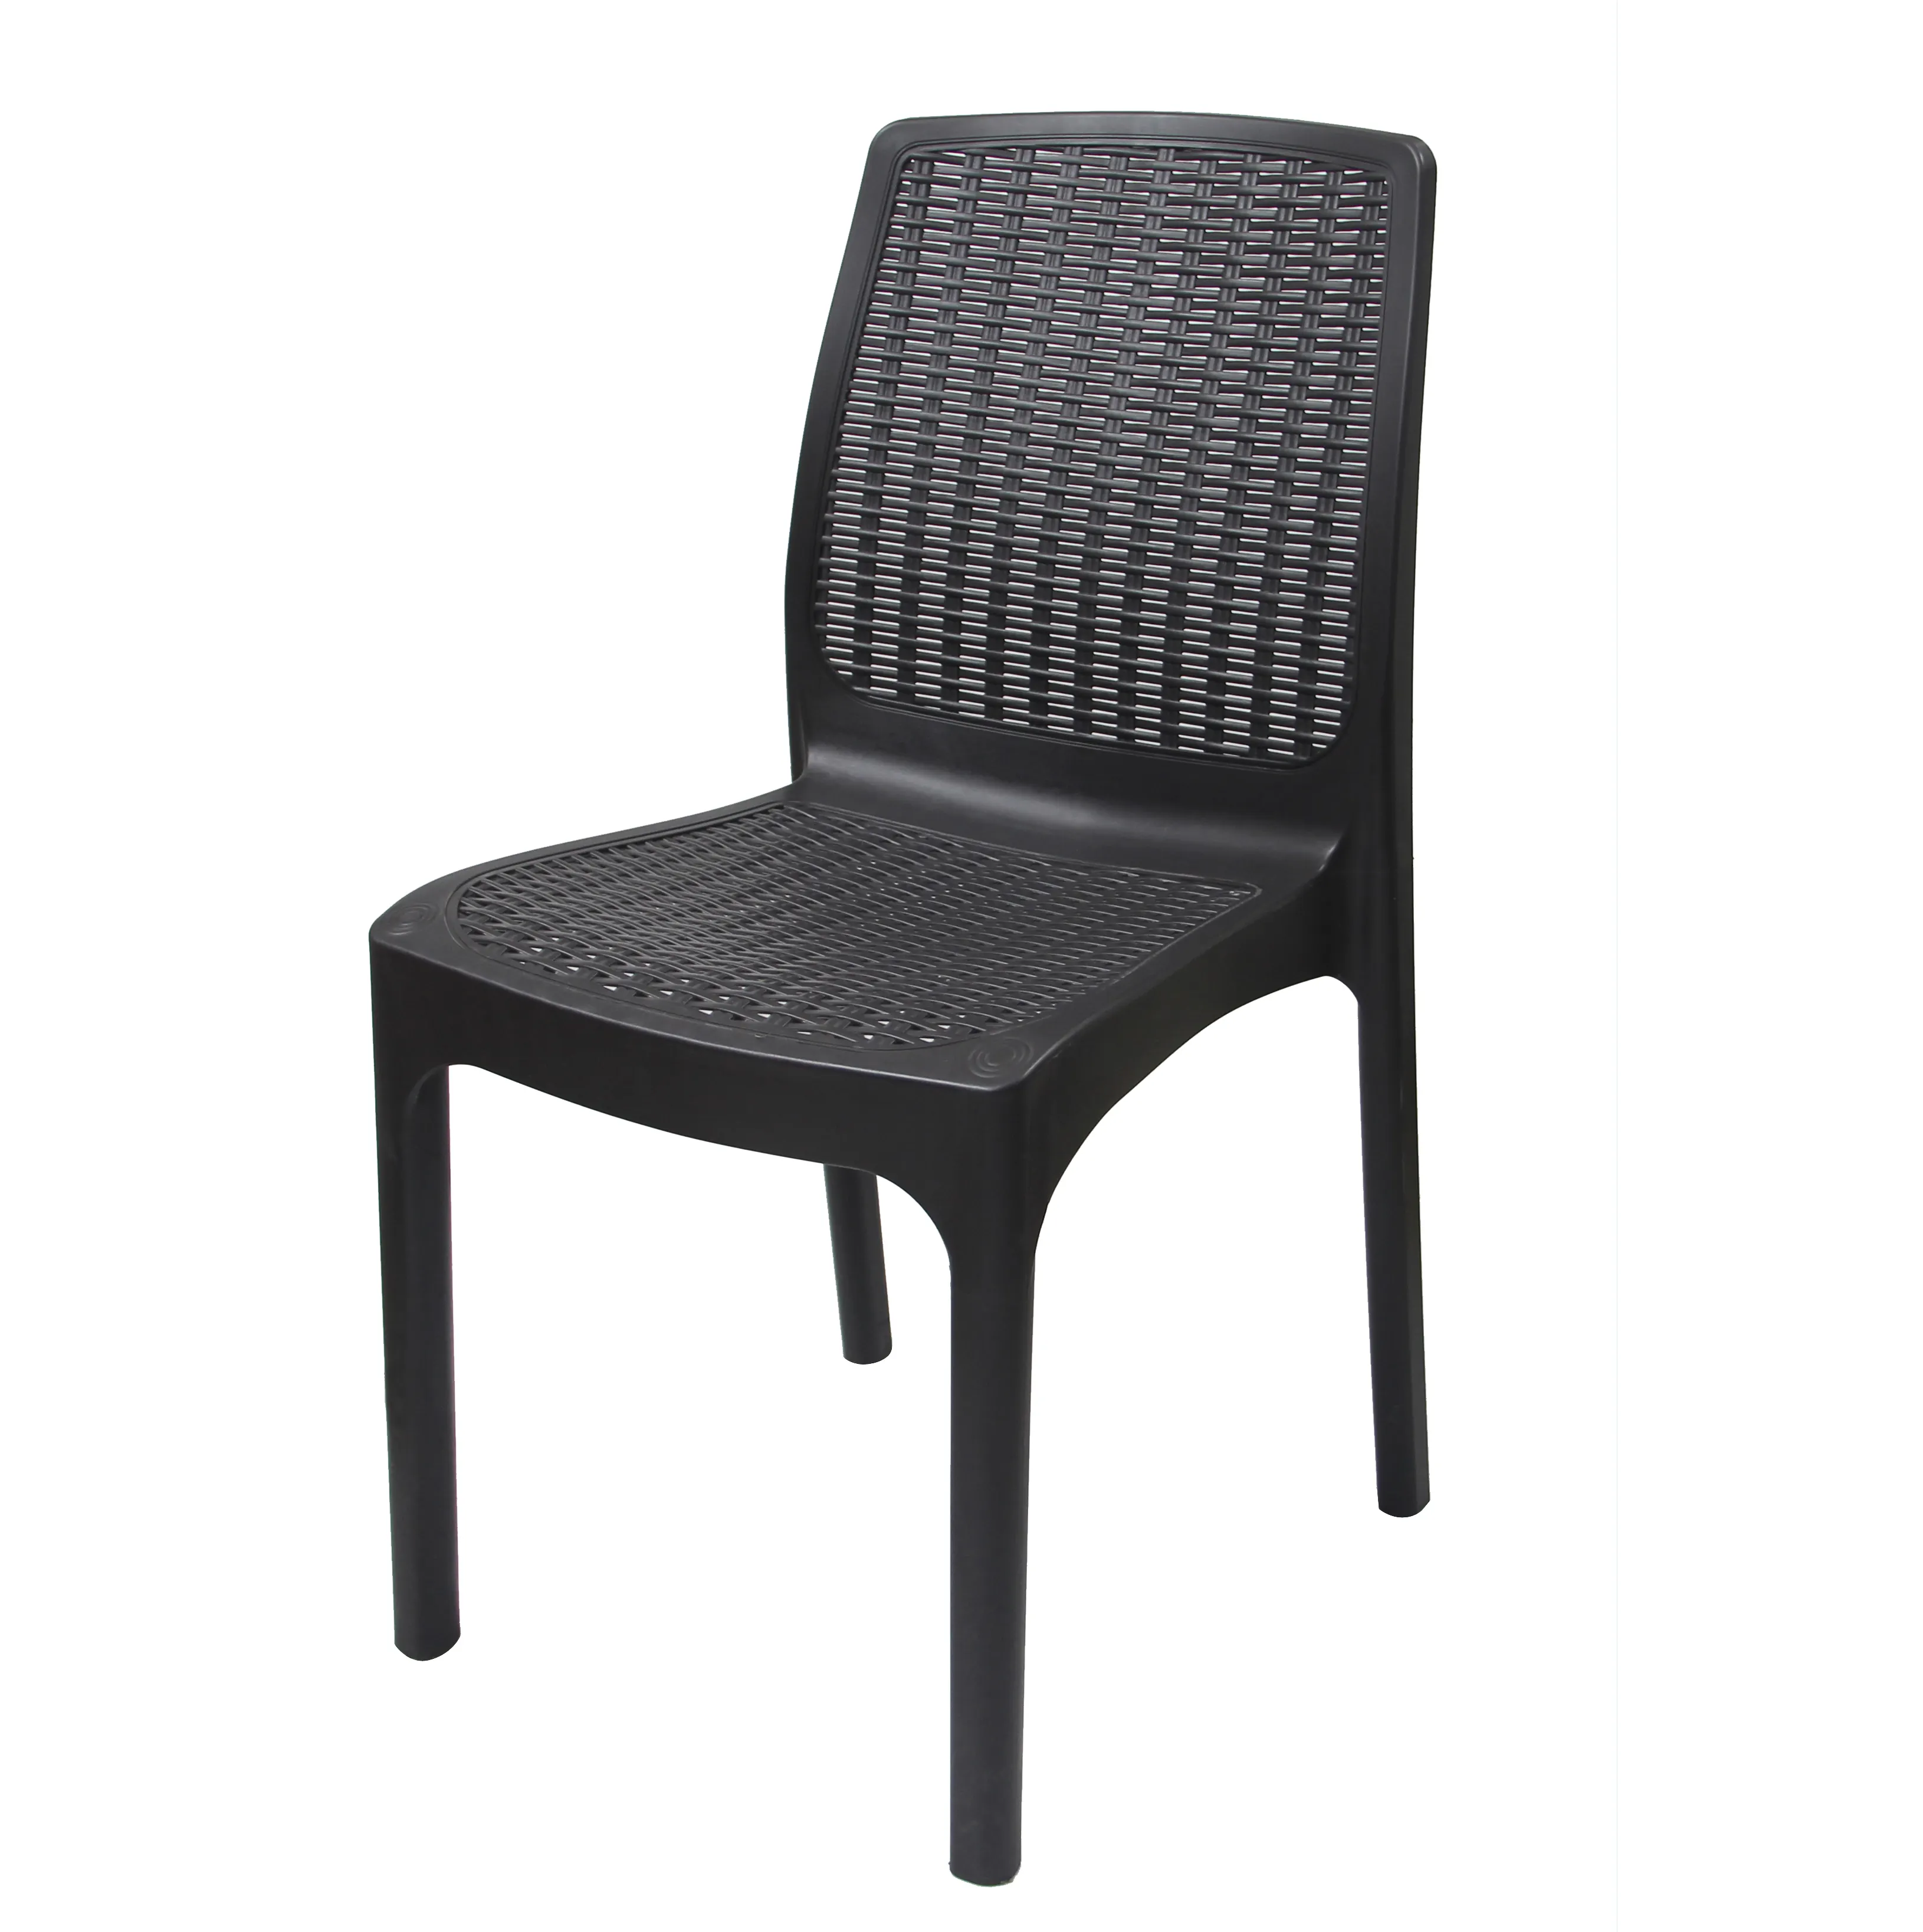 Outdoor furniture dining chairs rattan plastic woven cane chairs Wholesale Buy Factory Plastic Rattan Chair Price leisure